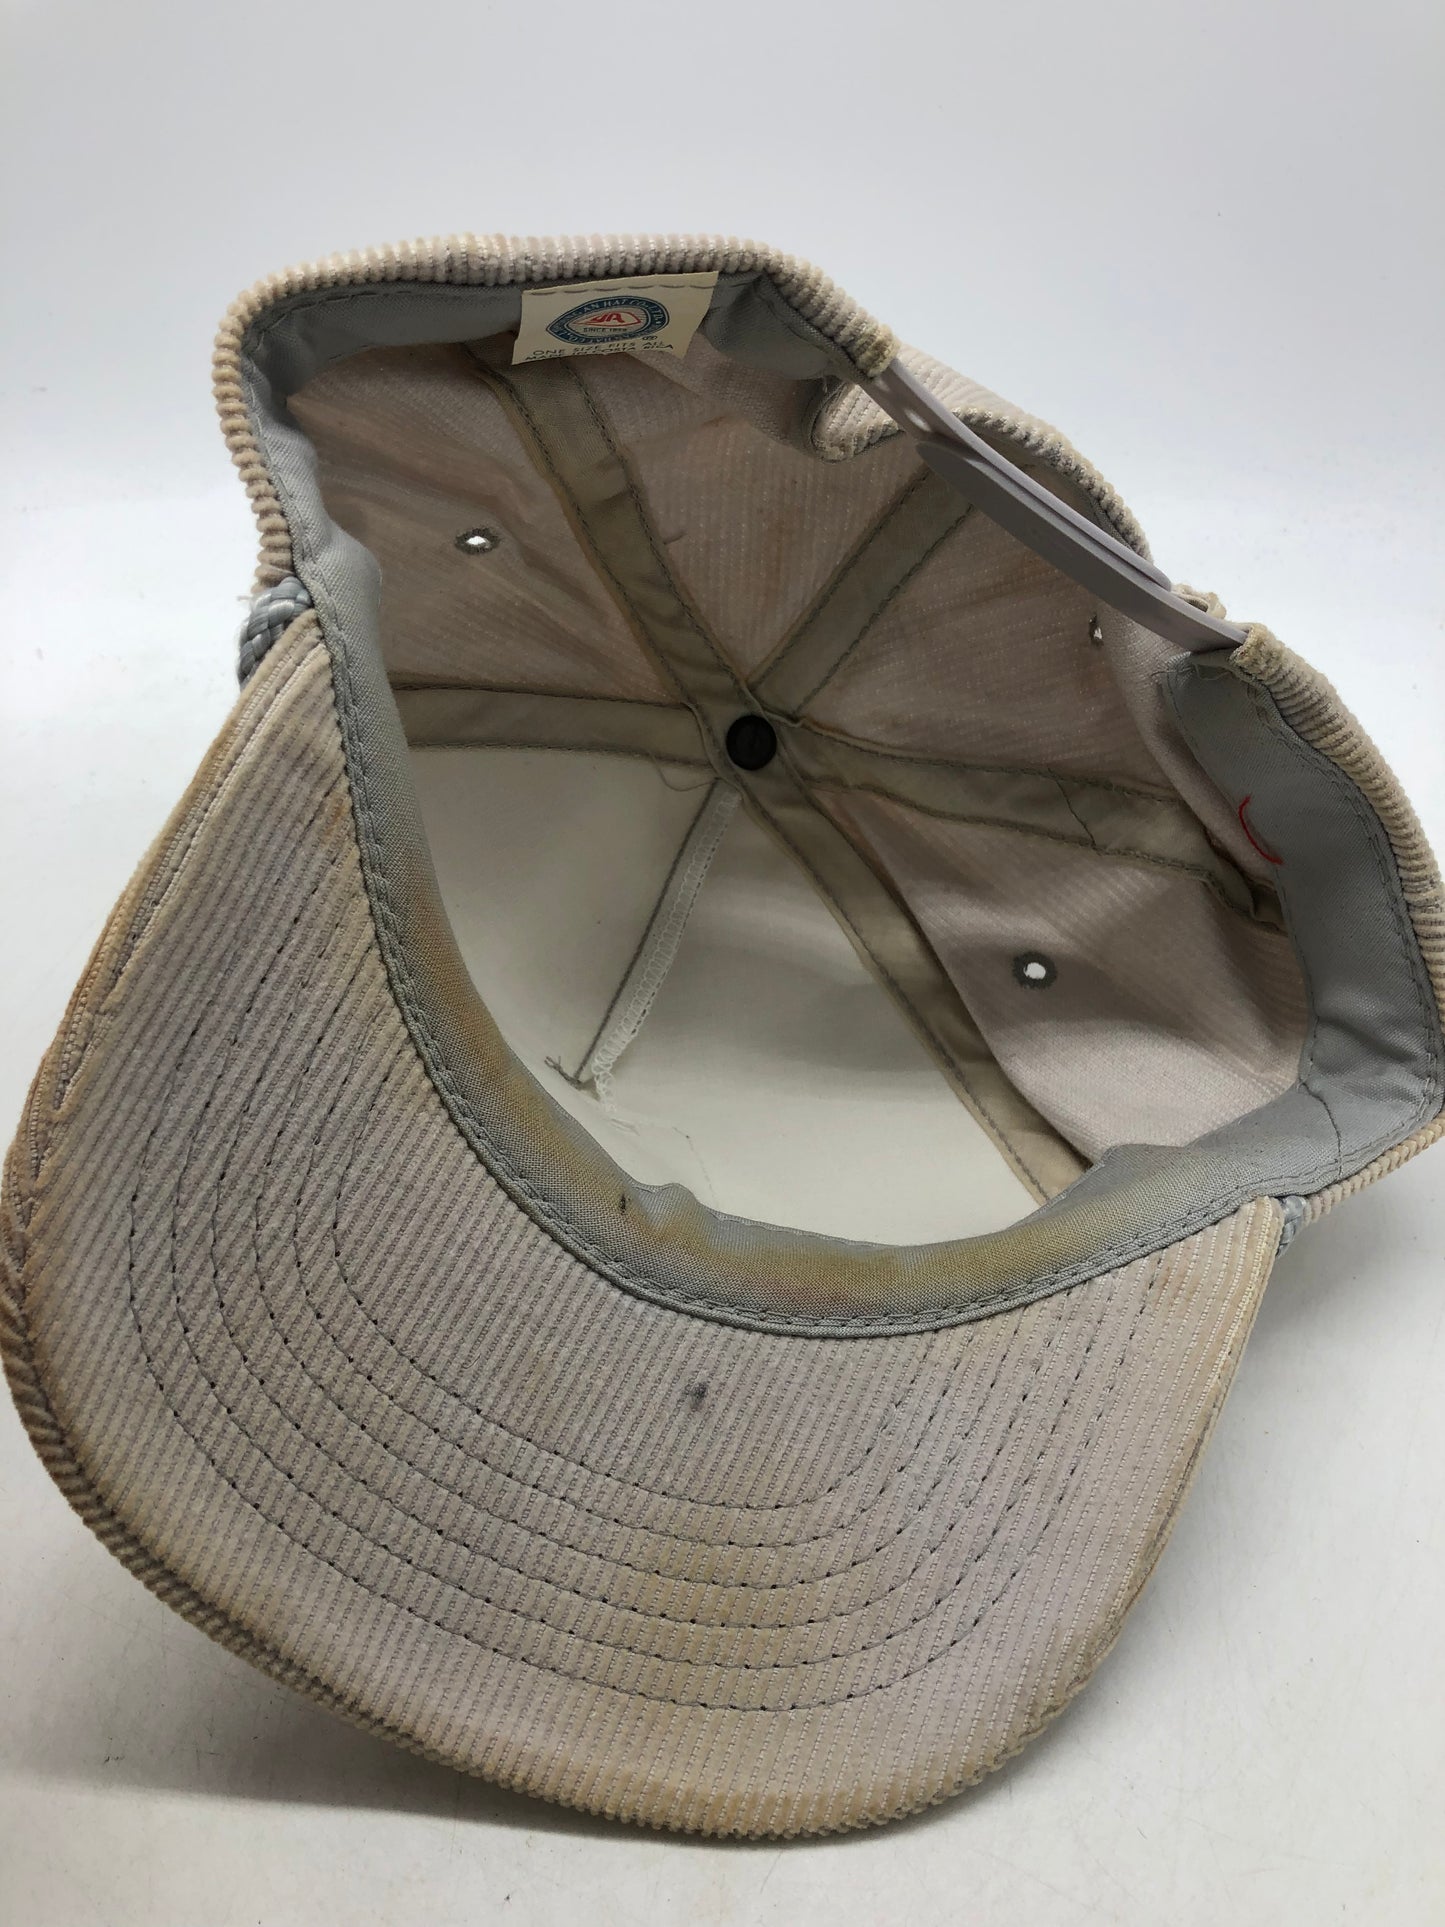 VTG Paclease Corduroy Gray Rope Snapback